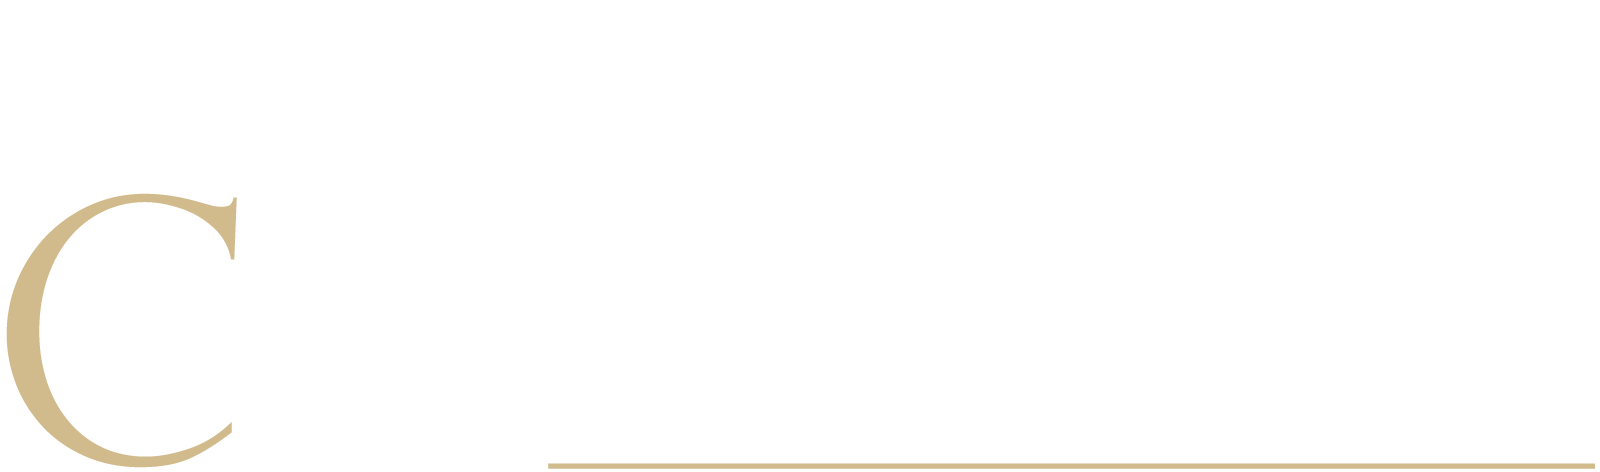 CQ Strategies and Consulting